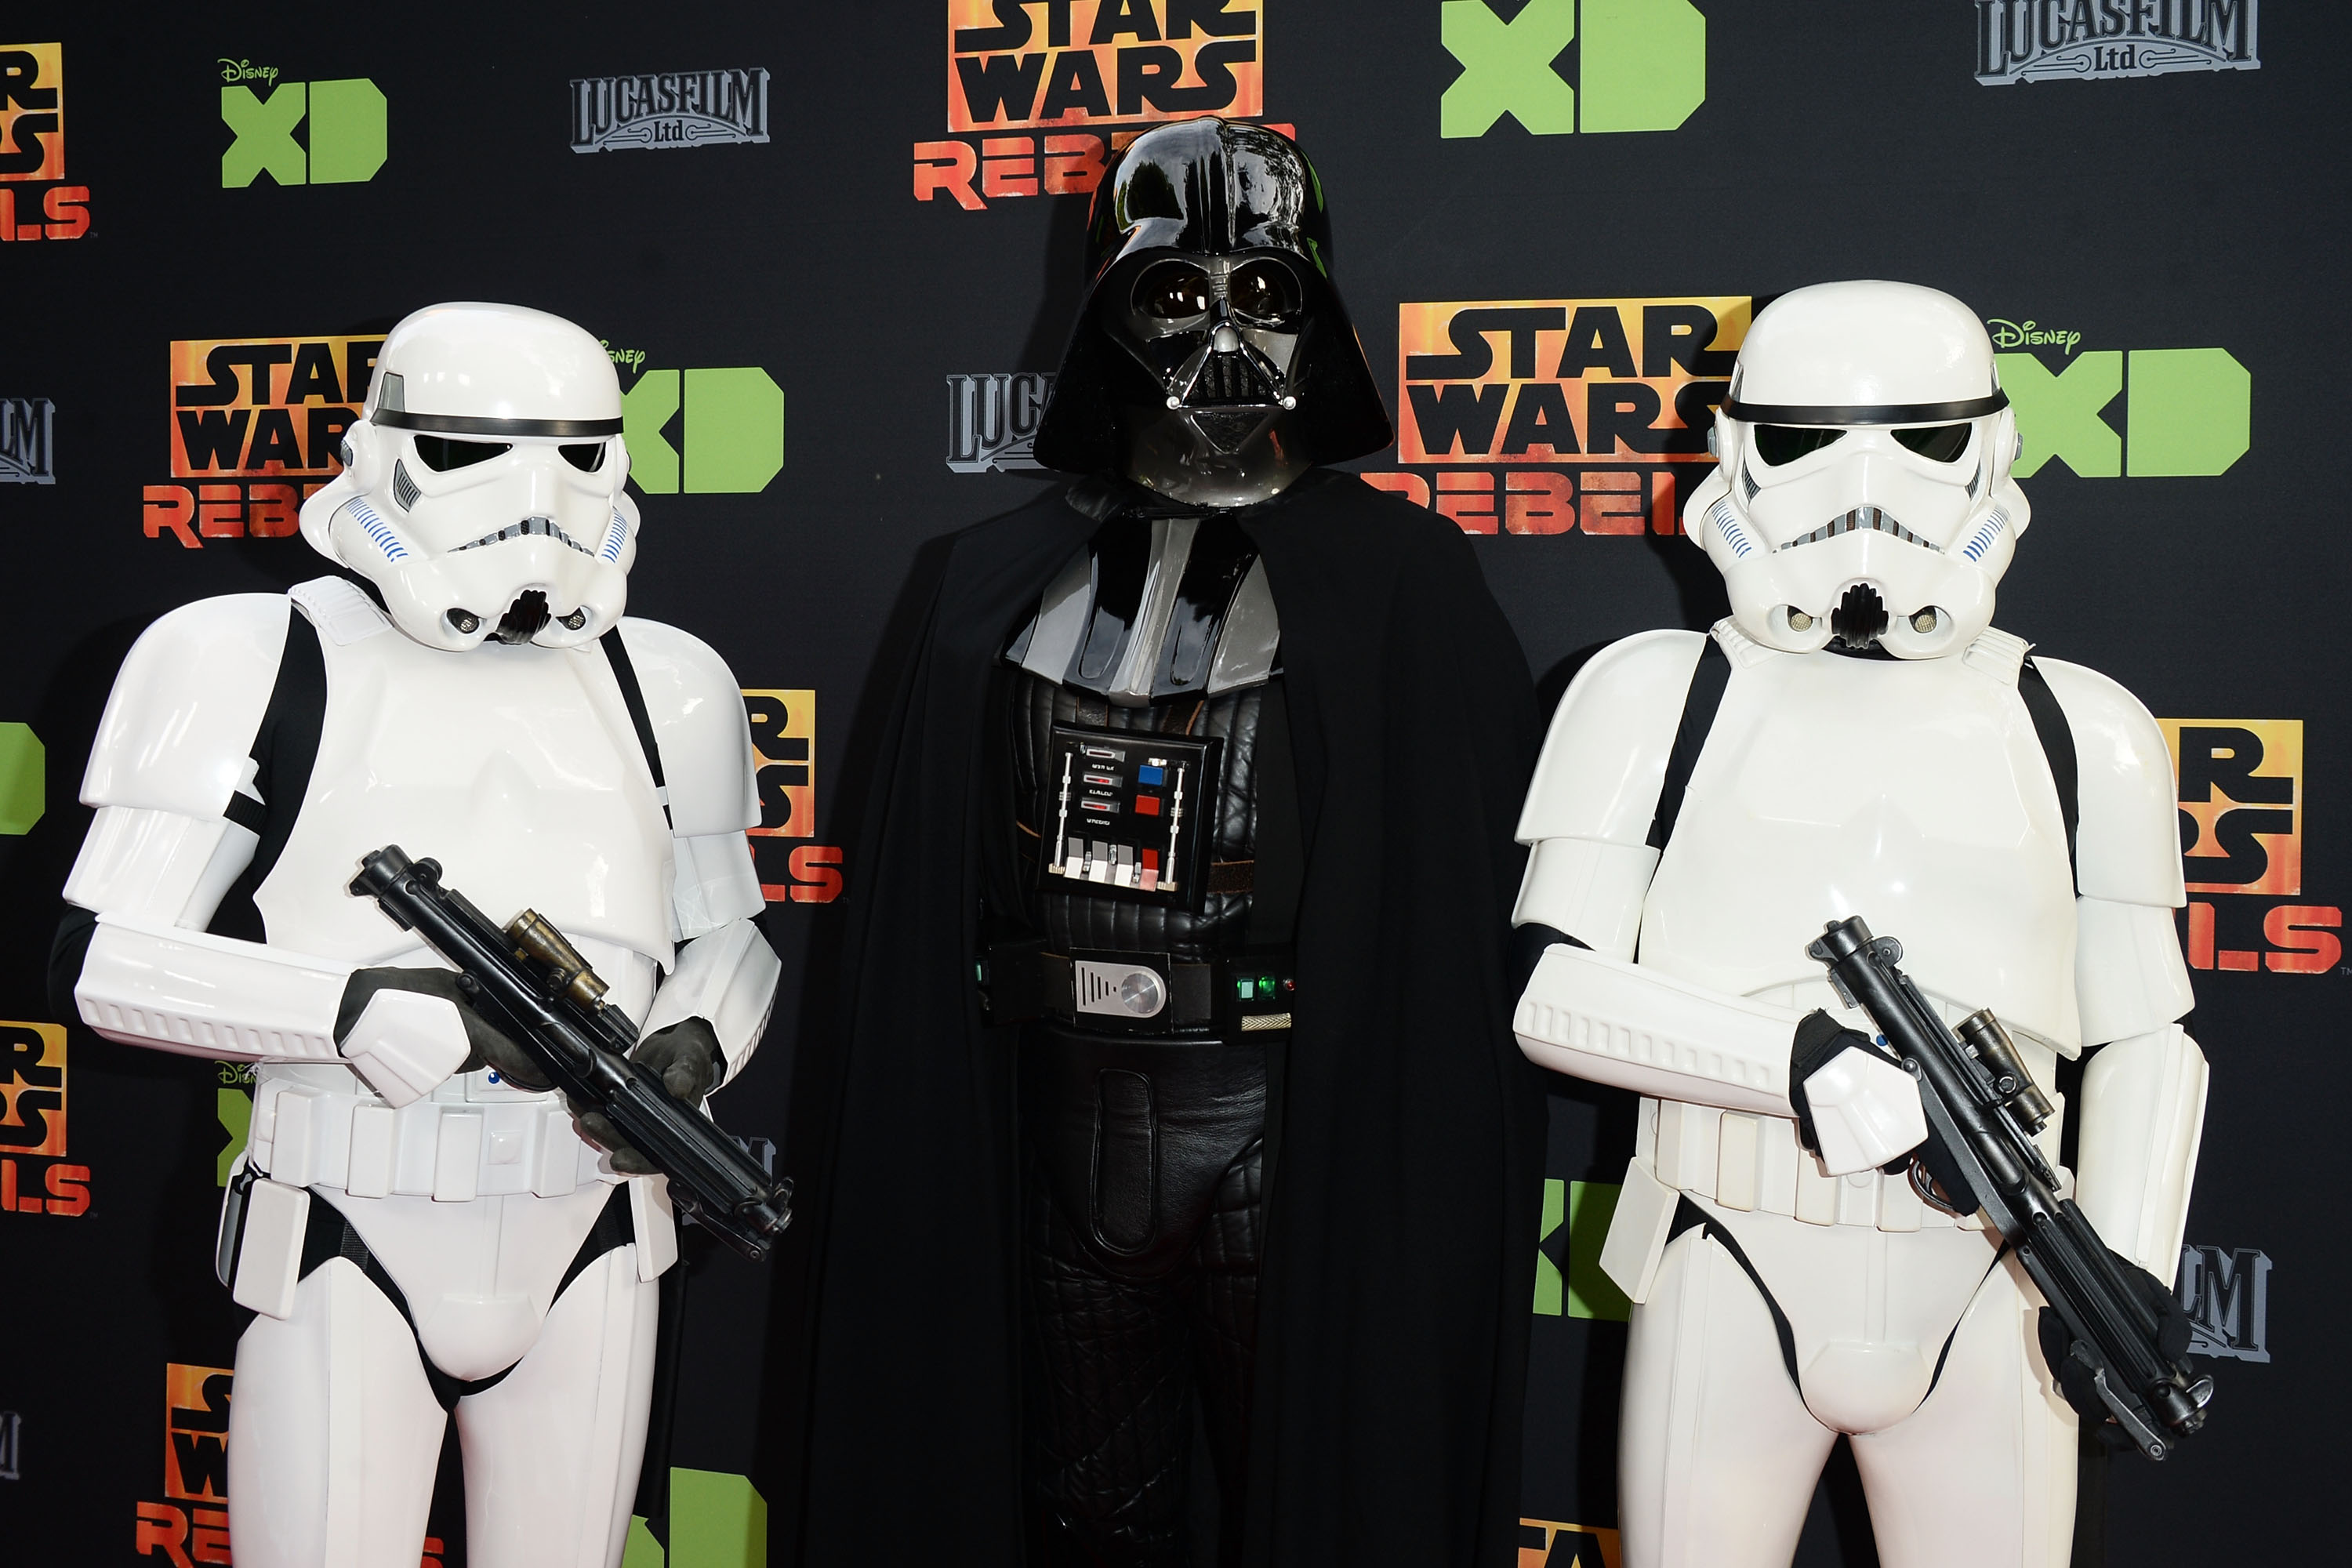 (FILES) In this file photo taken on March 27, 2016 Darth Vader and Stormtroopers arrive at the Disney XD's 'Star Wars Rebels' Season 2 finale event at Walt Disney Studios at Walt Disney Studios in Burbank, California. - The battle is on. Walt Disney Co. is bringing its biggest weapons to a new streaming service, including "Star Wars" and Marvel superheroes, in what is expected to be bruising war with Netflix and others for television dominance. The media-entertainment colossus announced its Disney+ streaming service would launch in November in the United States and gradually expand internationally. (Photo by Matt Winkelmeyer / GETTY IMAGES NORTH AMERICA / AFP)